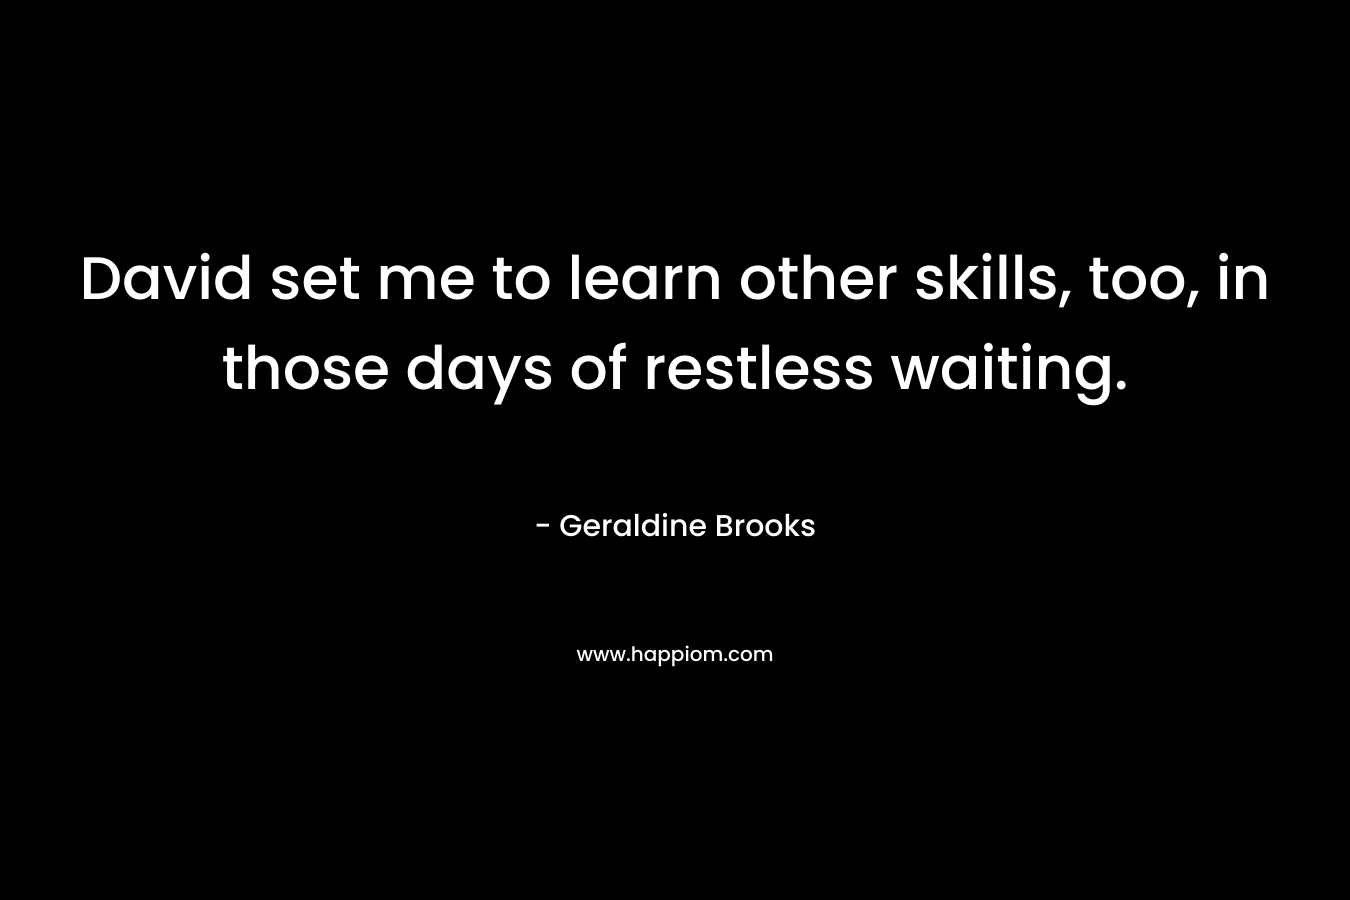 David set me to learn other skills, too, in those days of restless waiting. – Geraldine Brooks